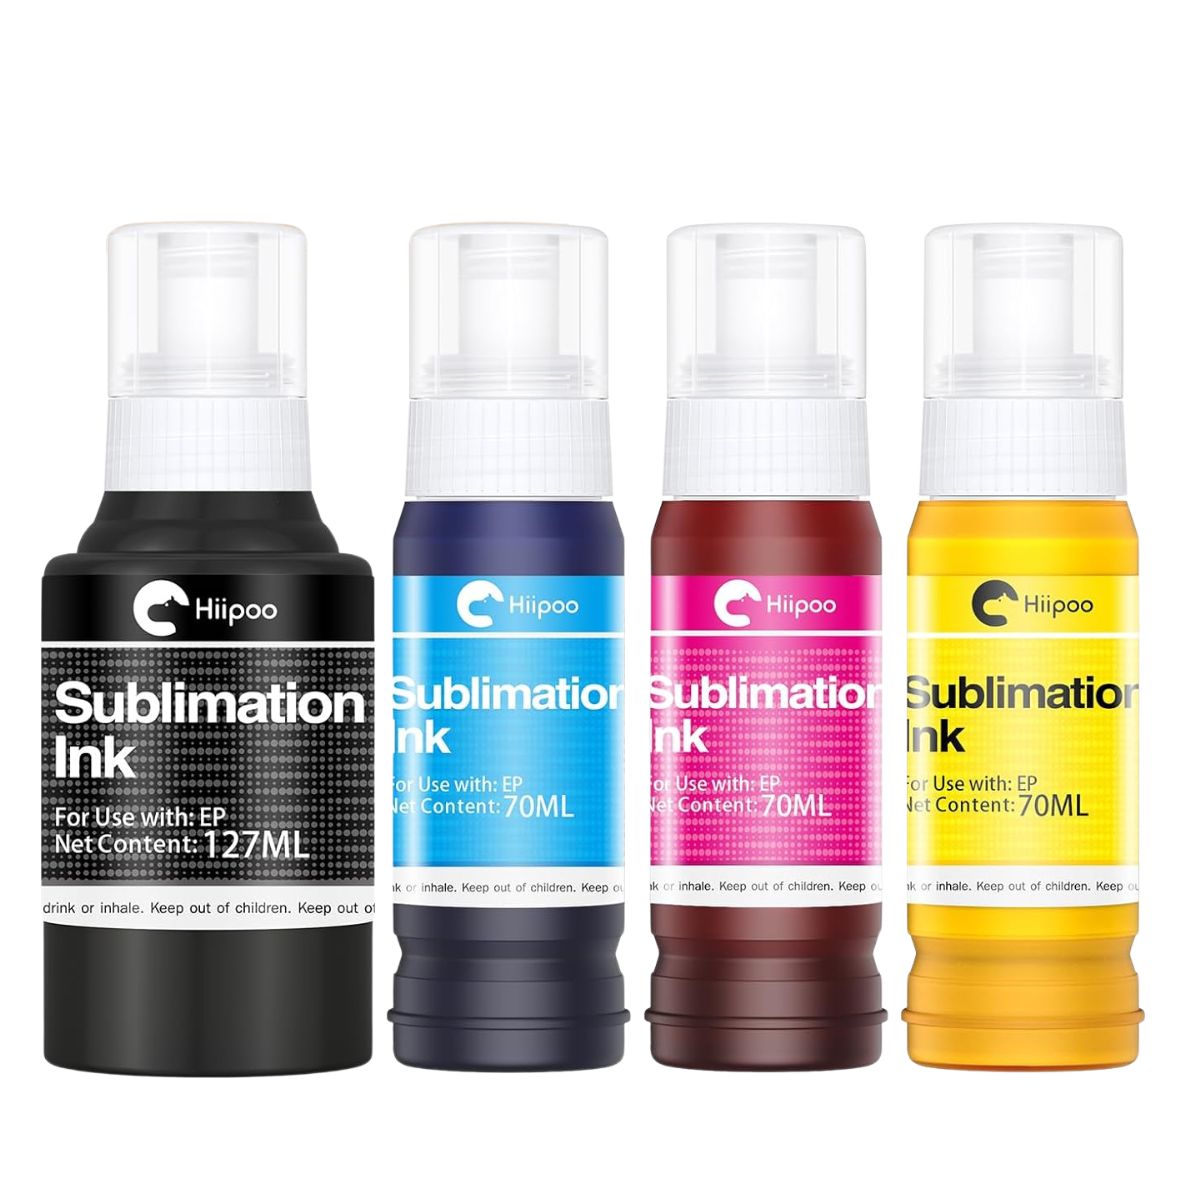 Hiipoo Sublimation Ink Refills For Et Series Printers 3144